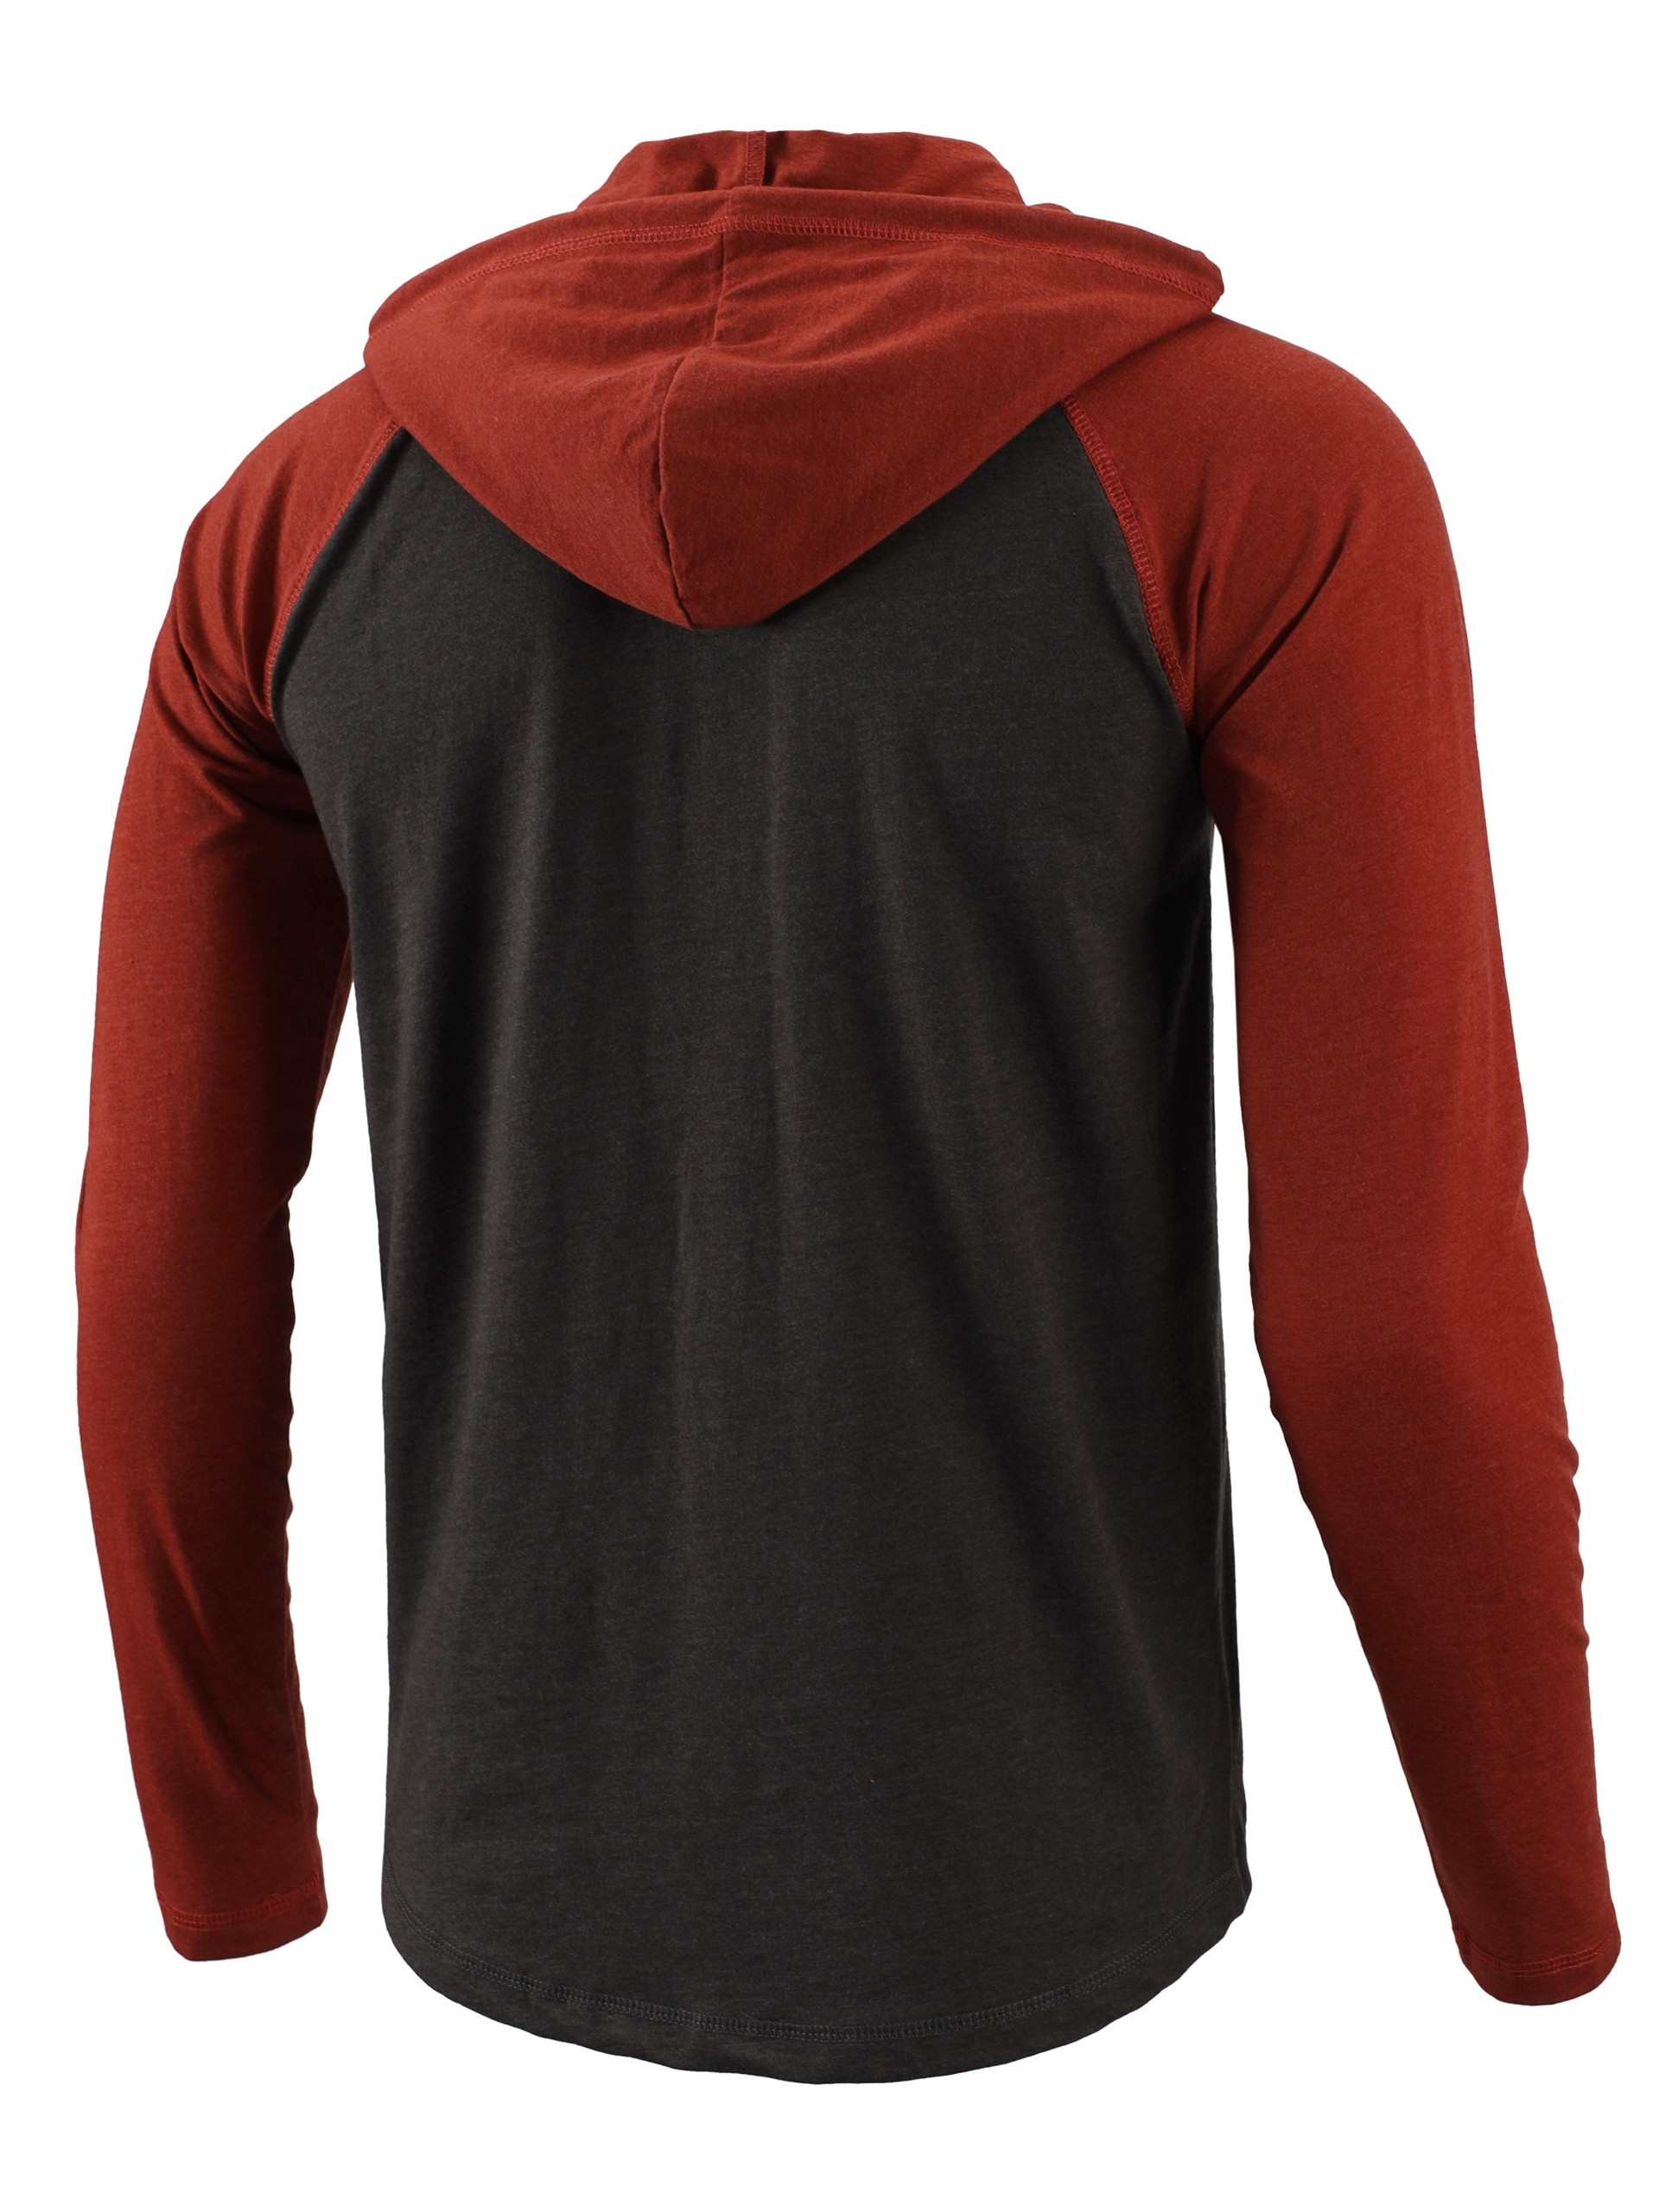 Men’s Stylish Loose Color Blocking Lightweight Hoodie With Pockets, Active Breathable Long Sleeve Button Up Hooded Sweatshirt For Spring Fall